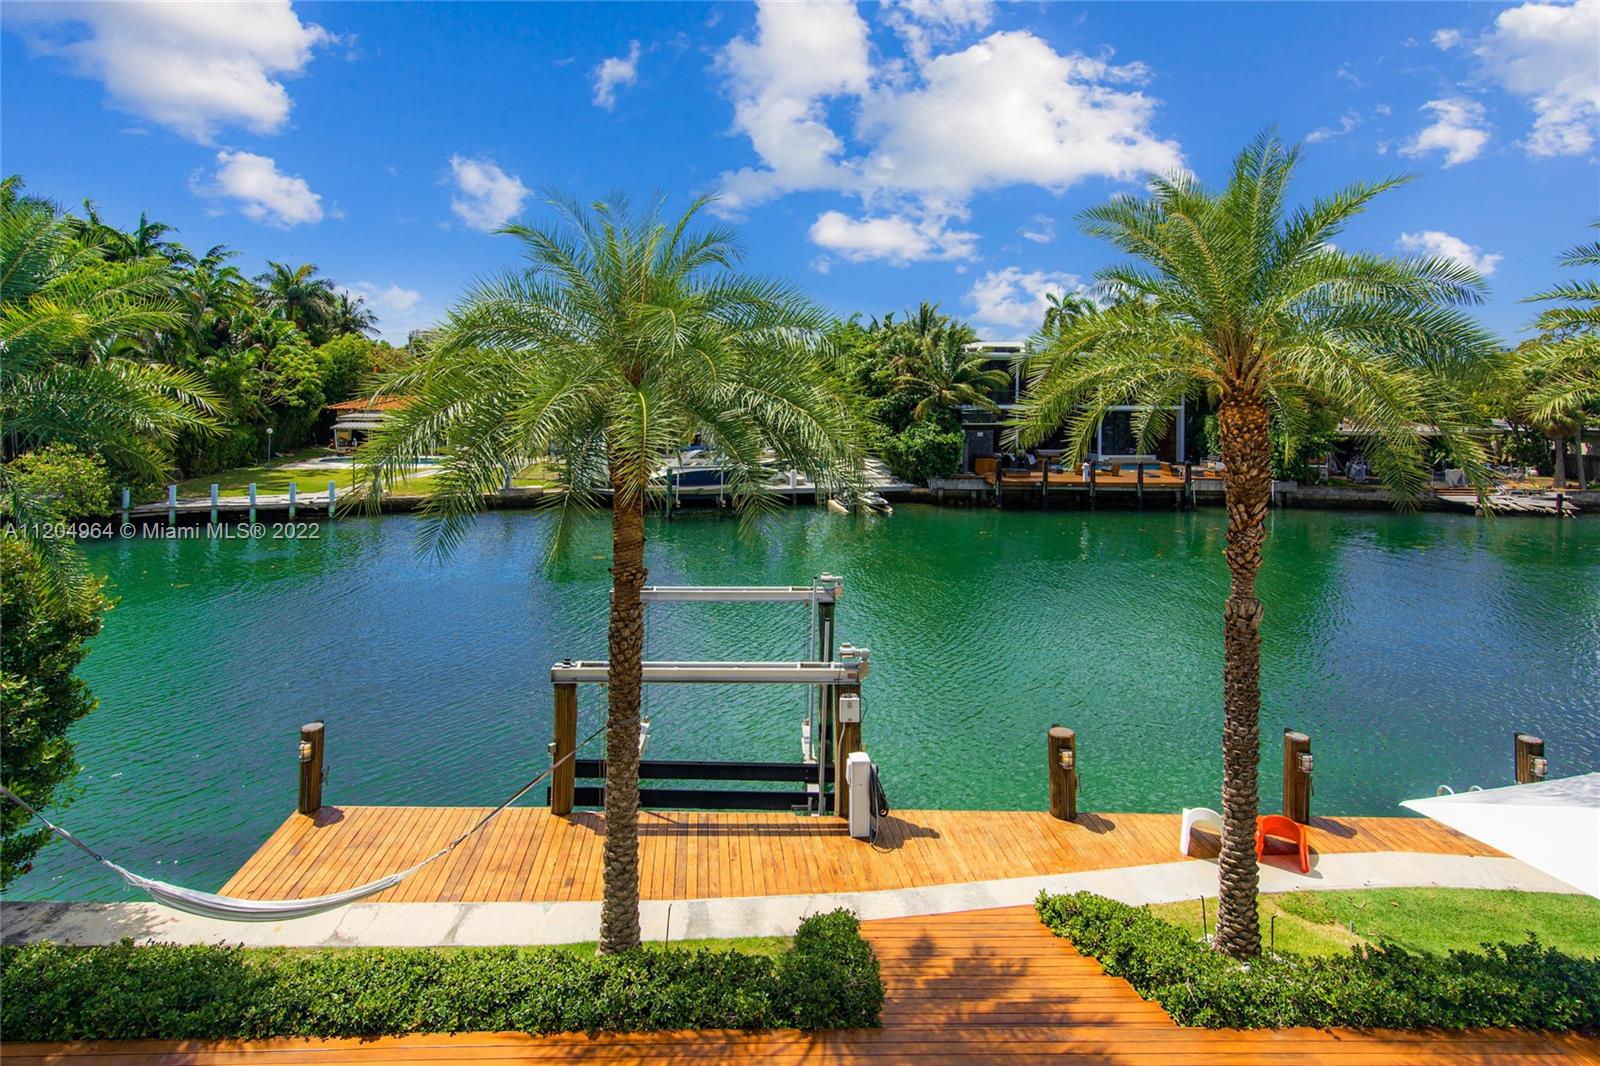 This stunning waterfront house is the perfect combination between luxury and modernity, Located on a quiet cul de sac Meridian ave. This two-story home was built in 2014, features 7 bedrooms & 7 bathrooms, with a large roof top. Entry foyer with an interior garden will lead you to a sleek chef’s kitchen w/top-of-the-line appliances, center island, custom cabinetry, wet bar and wine cellar. wide open living area tastefully decorated & family area with water views. A large 2nd floor principal suite with 2 private terraces & amazing principal bath w/custom walk-in closet. modern glass tiled pool looking out to the water, full private dock, large terrace, outdoor kitchen and BBQ area, perfect for entertaining.